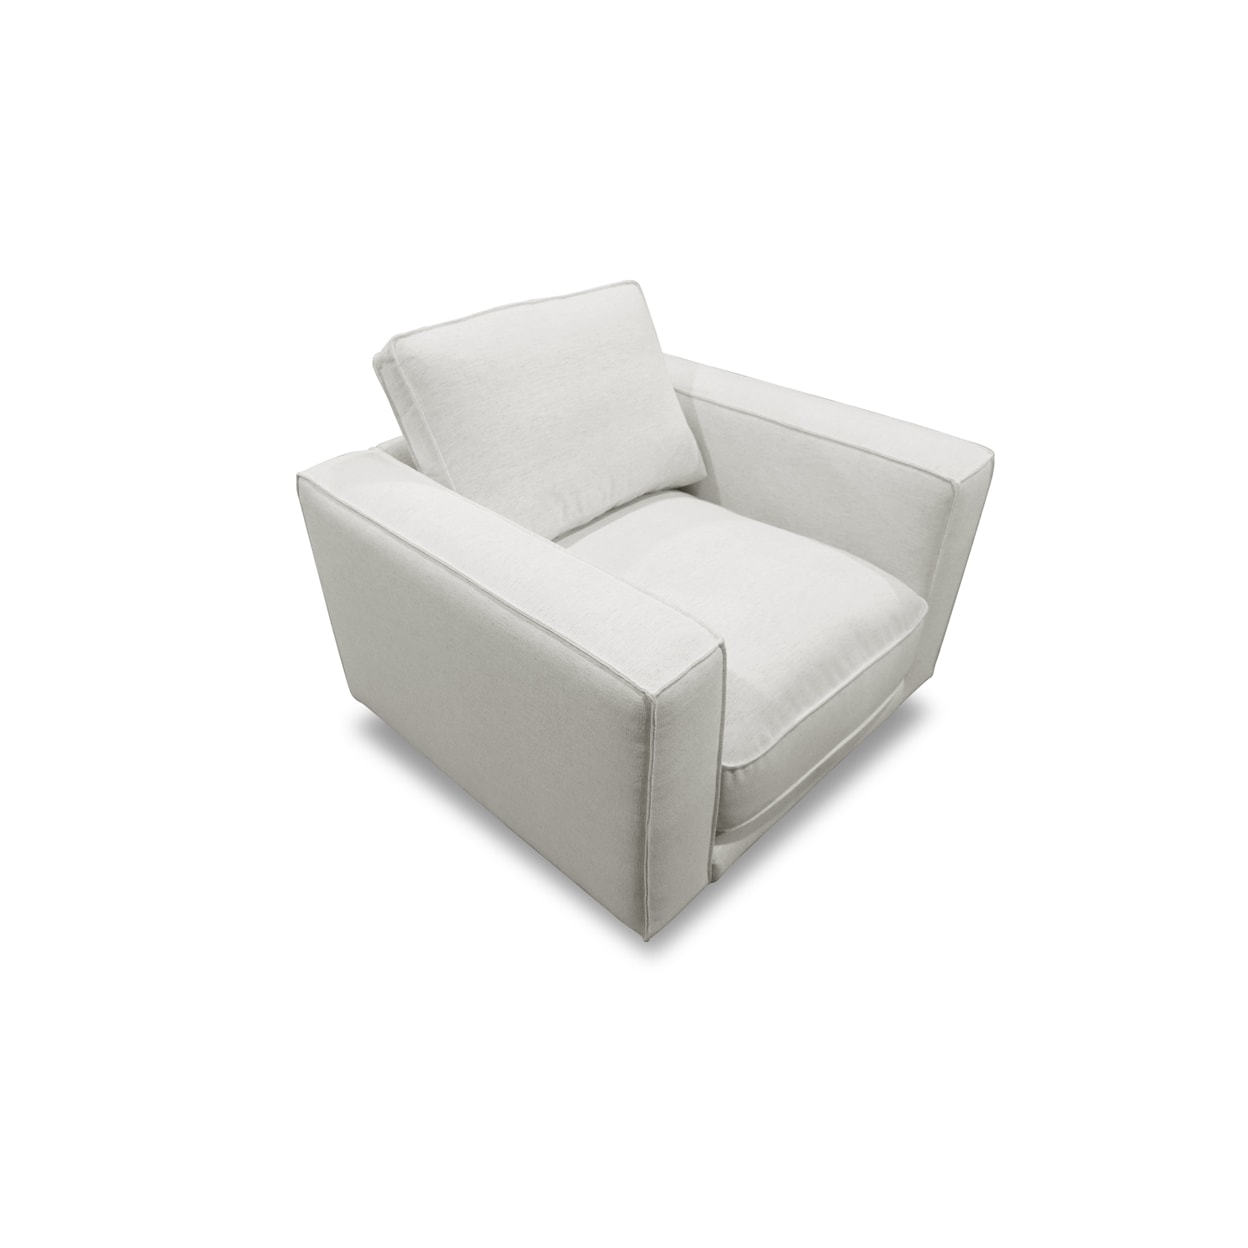 K.C. Kyren with Crypton Home Performance Fabric Swivel Chair